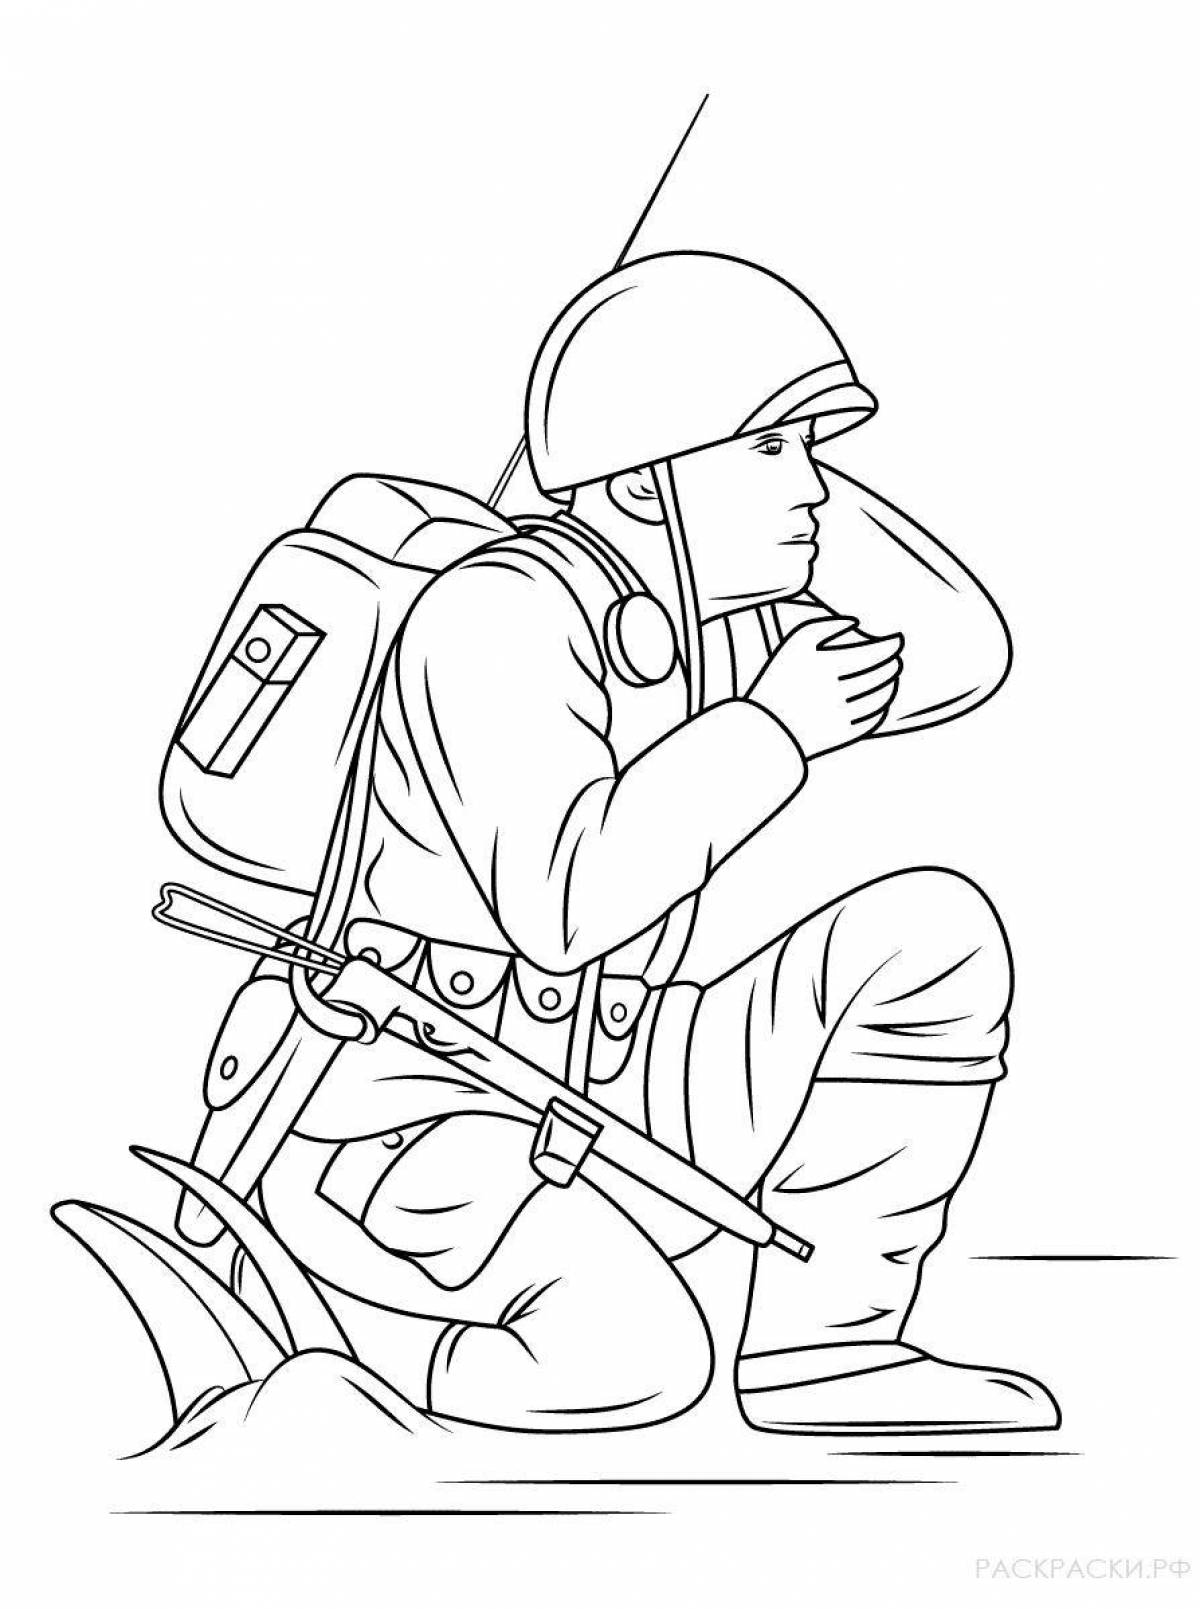 Royal war coloring pages for kids